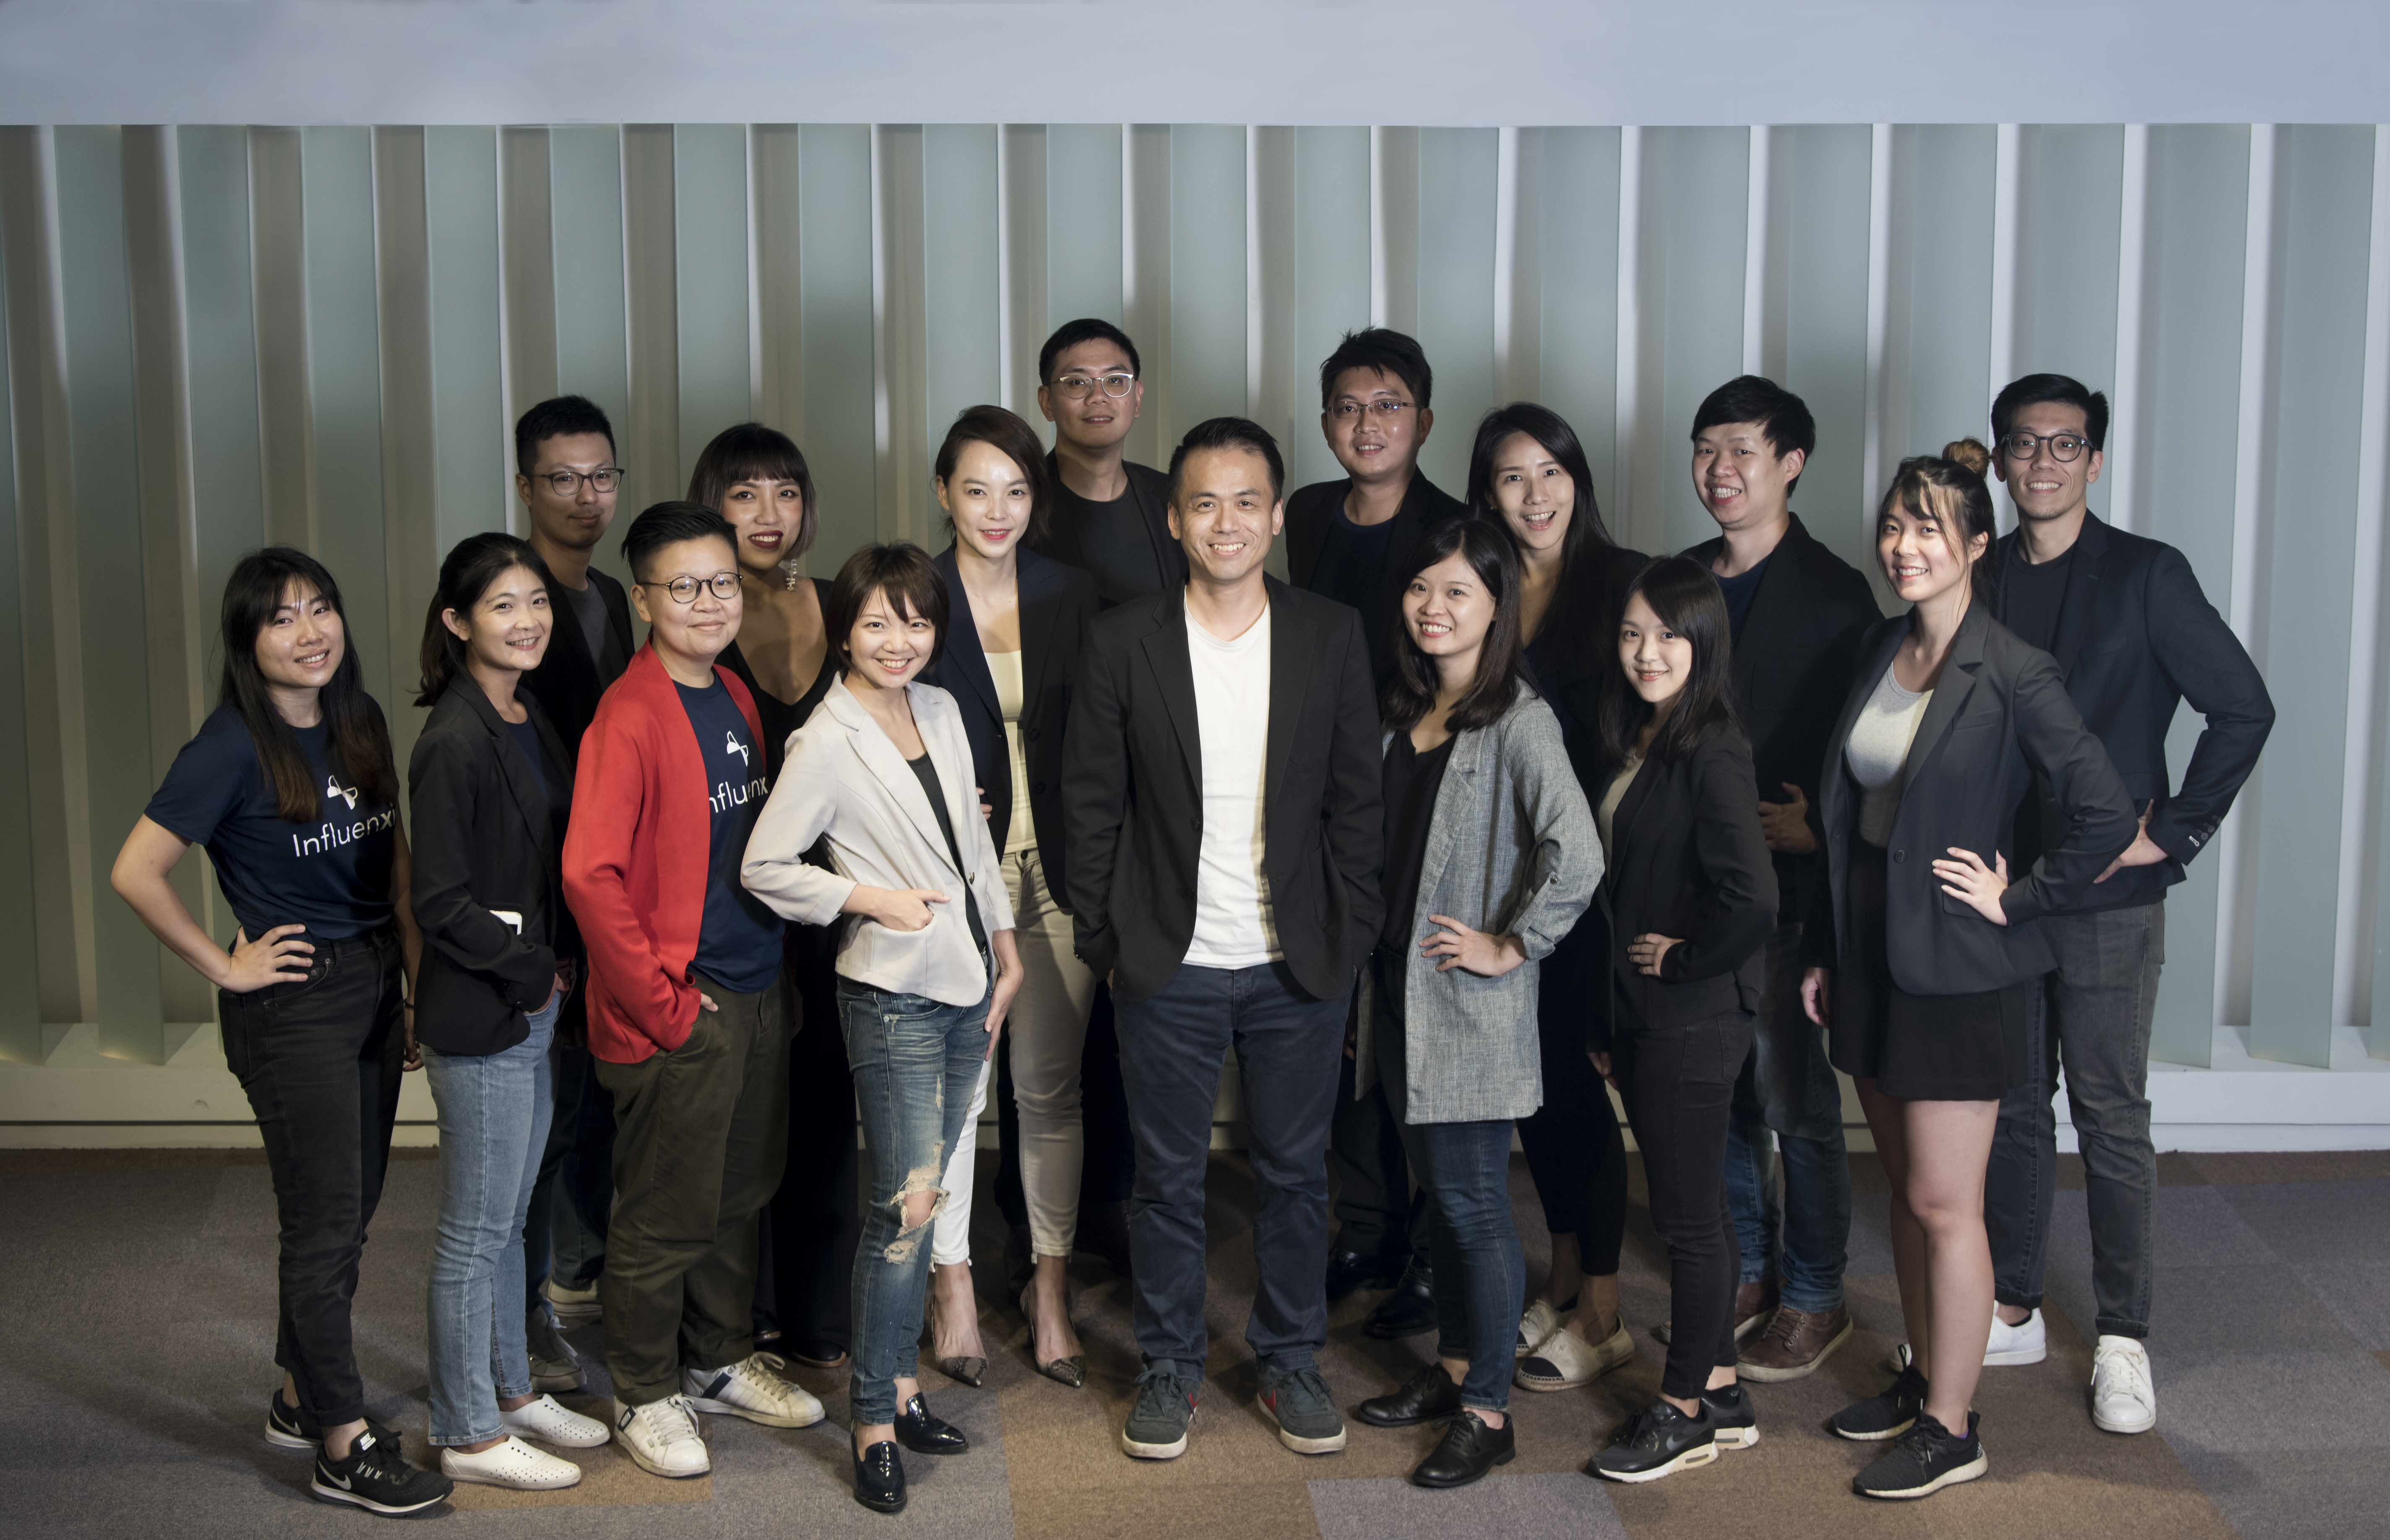 Influencer marketing startup Influenxio's team, with founder and CEO Allan Ko in the center